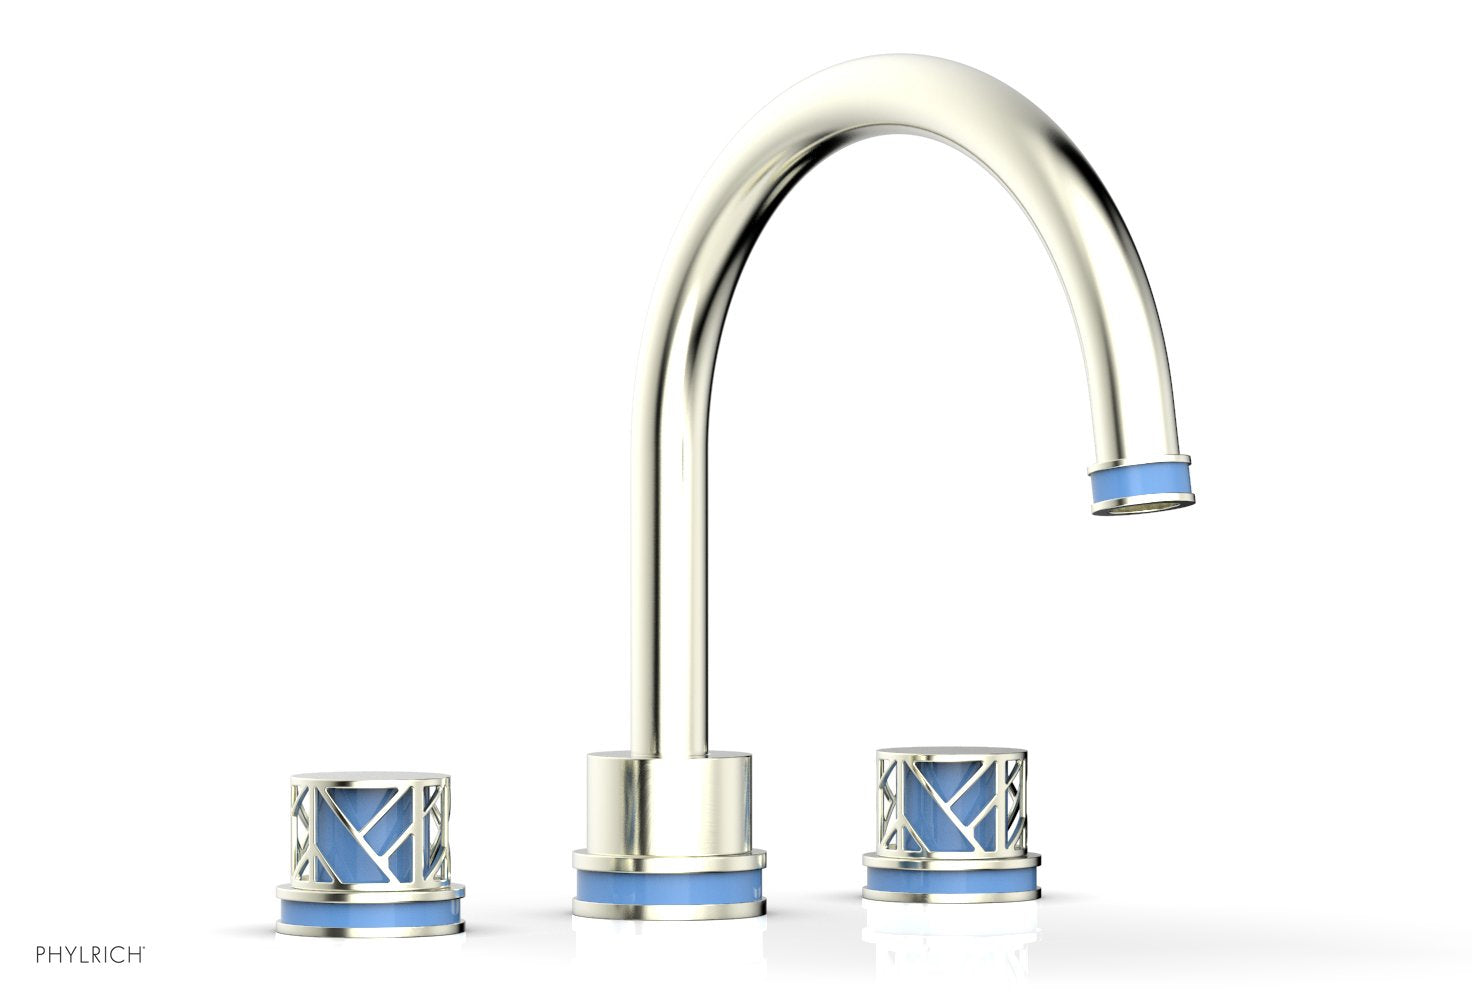 Phylrich JOLIE Deck Tub Set - Round Handles with "Light Blue" Accents